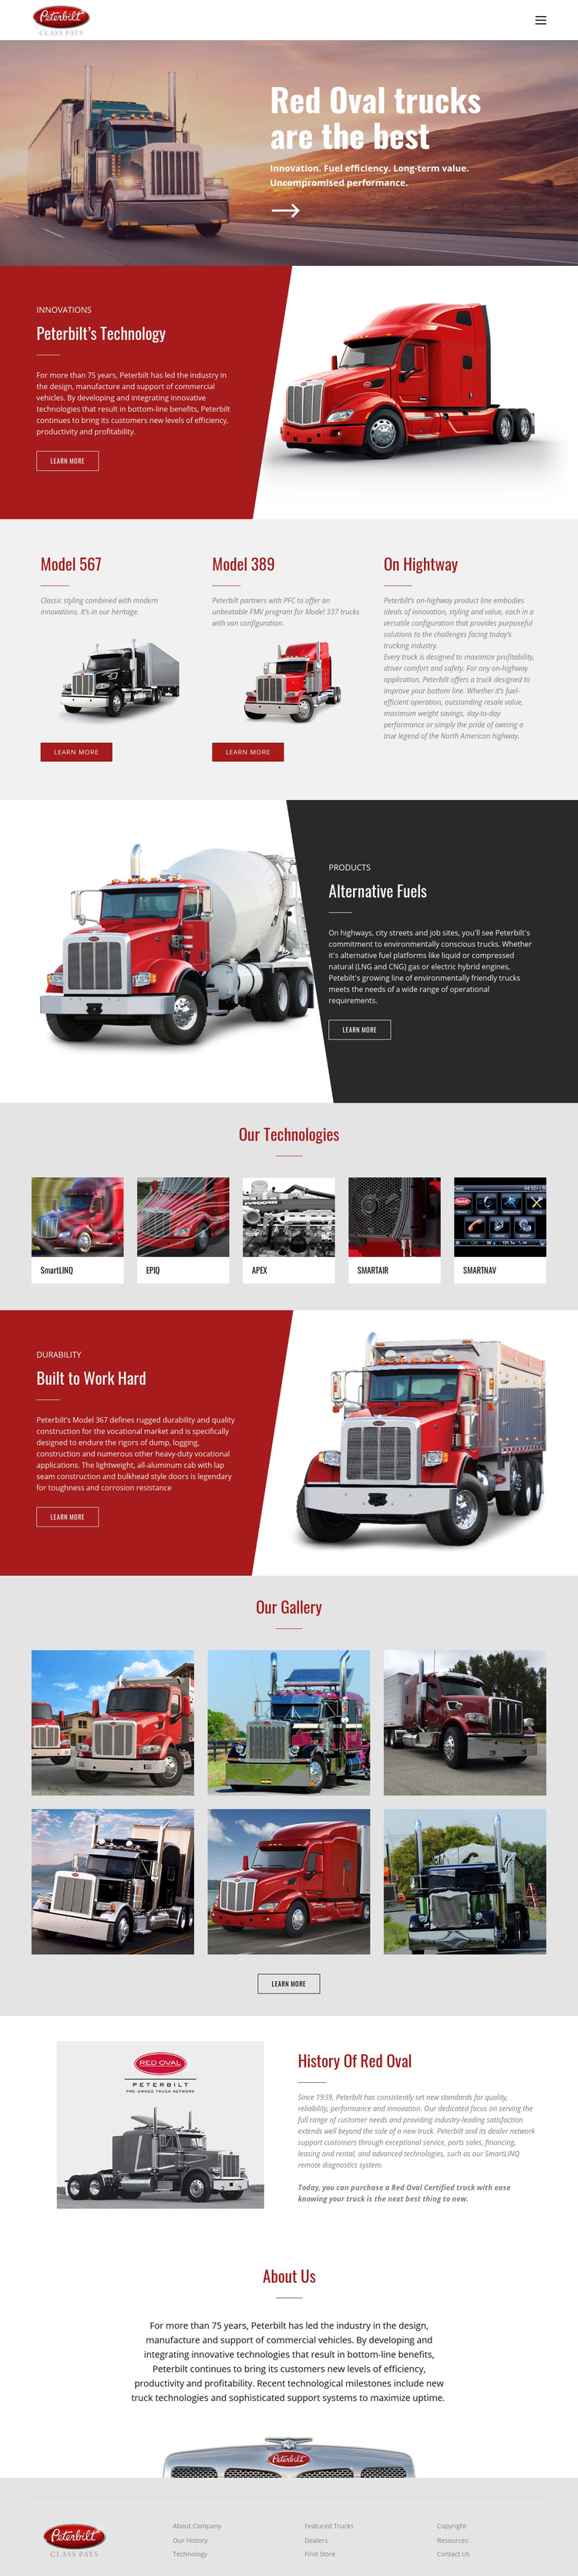 Red oval truck transportaion Homepage Design